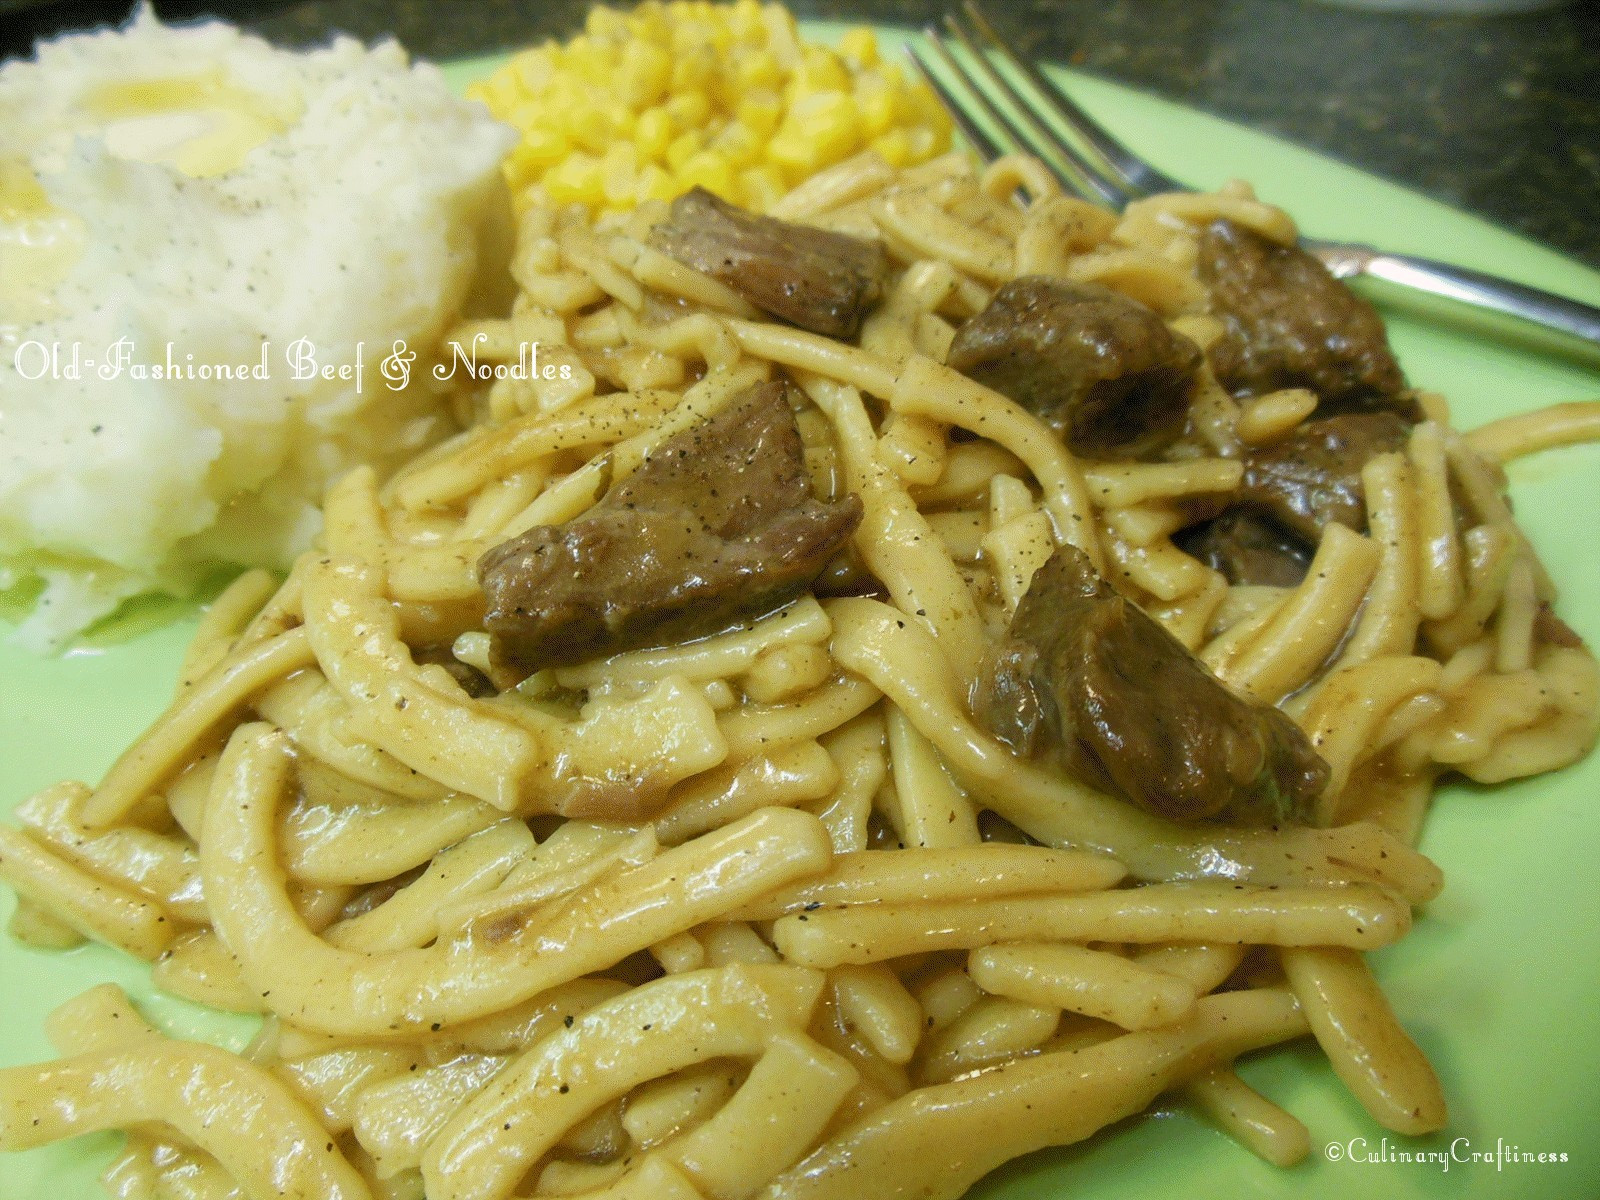 How To Make Beef And Noodles
 Old Fashioned Beef & Noodles